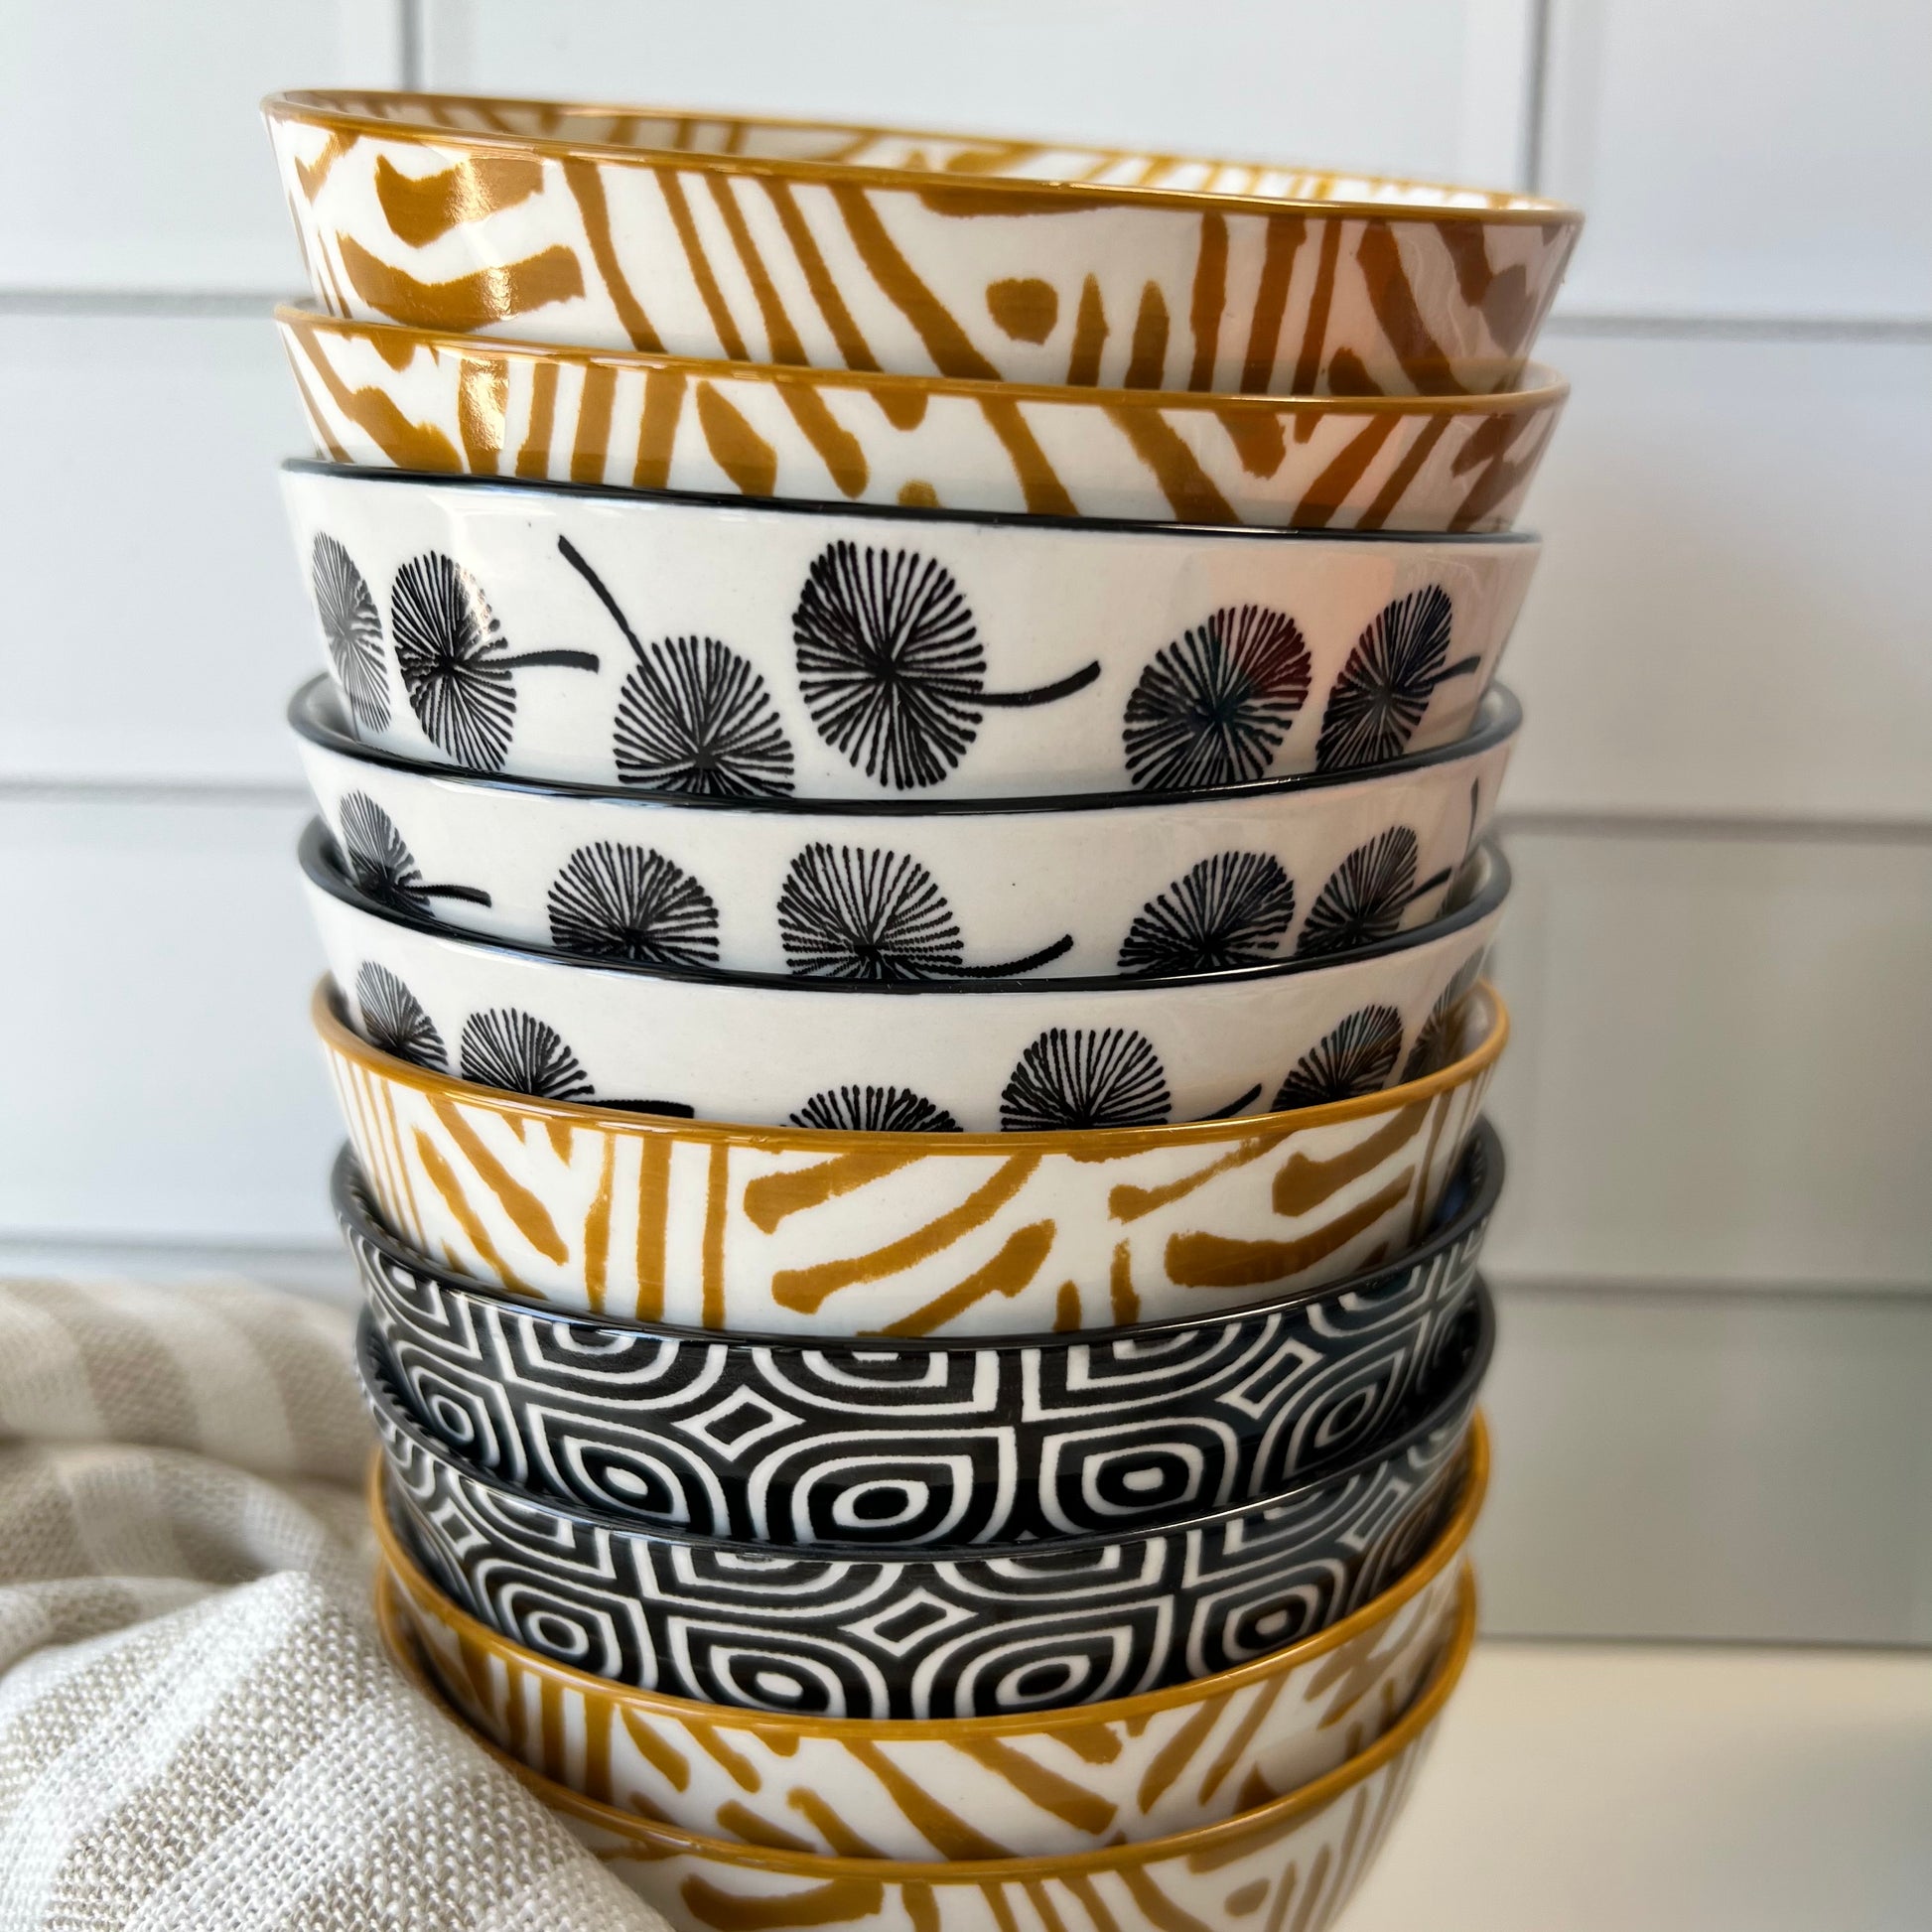 single stack of assorted bowls on a countertop with a dishtowel.